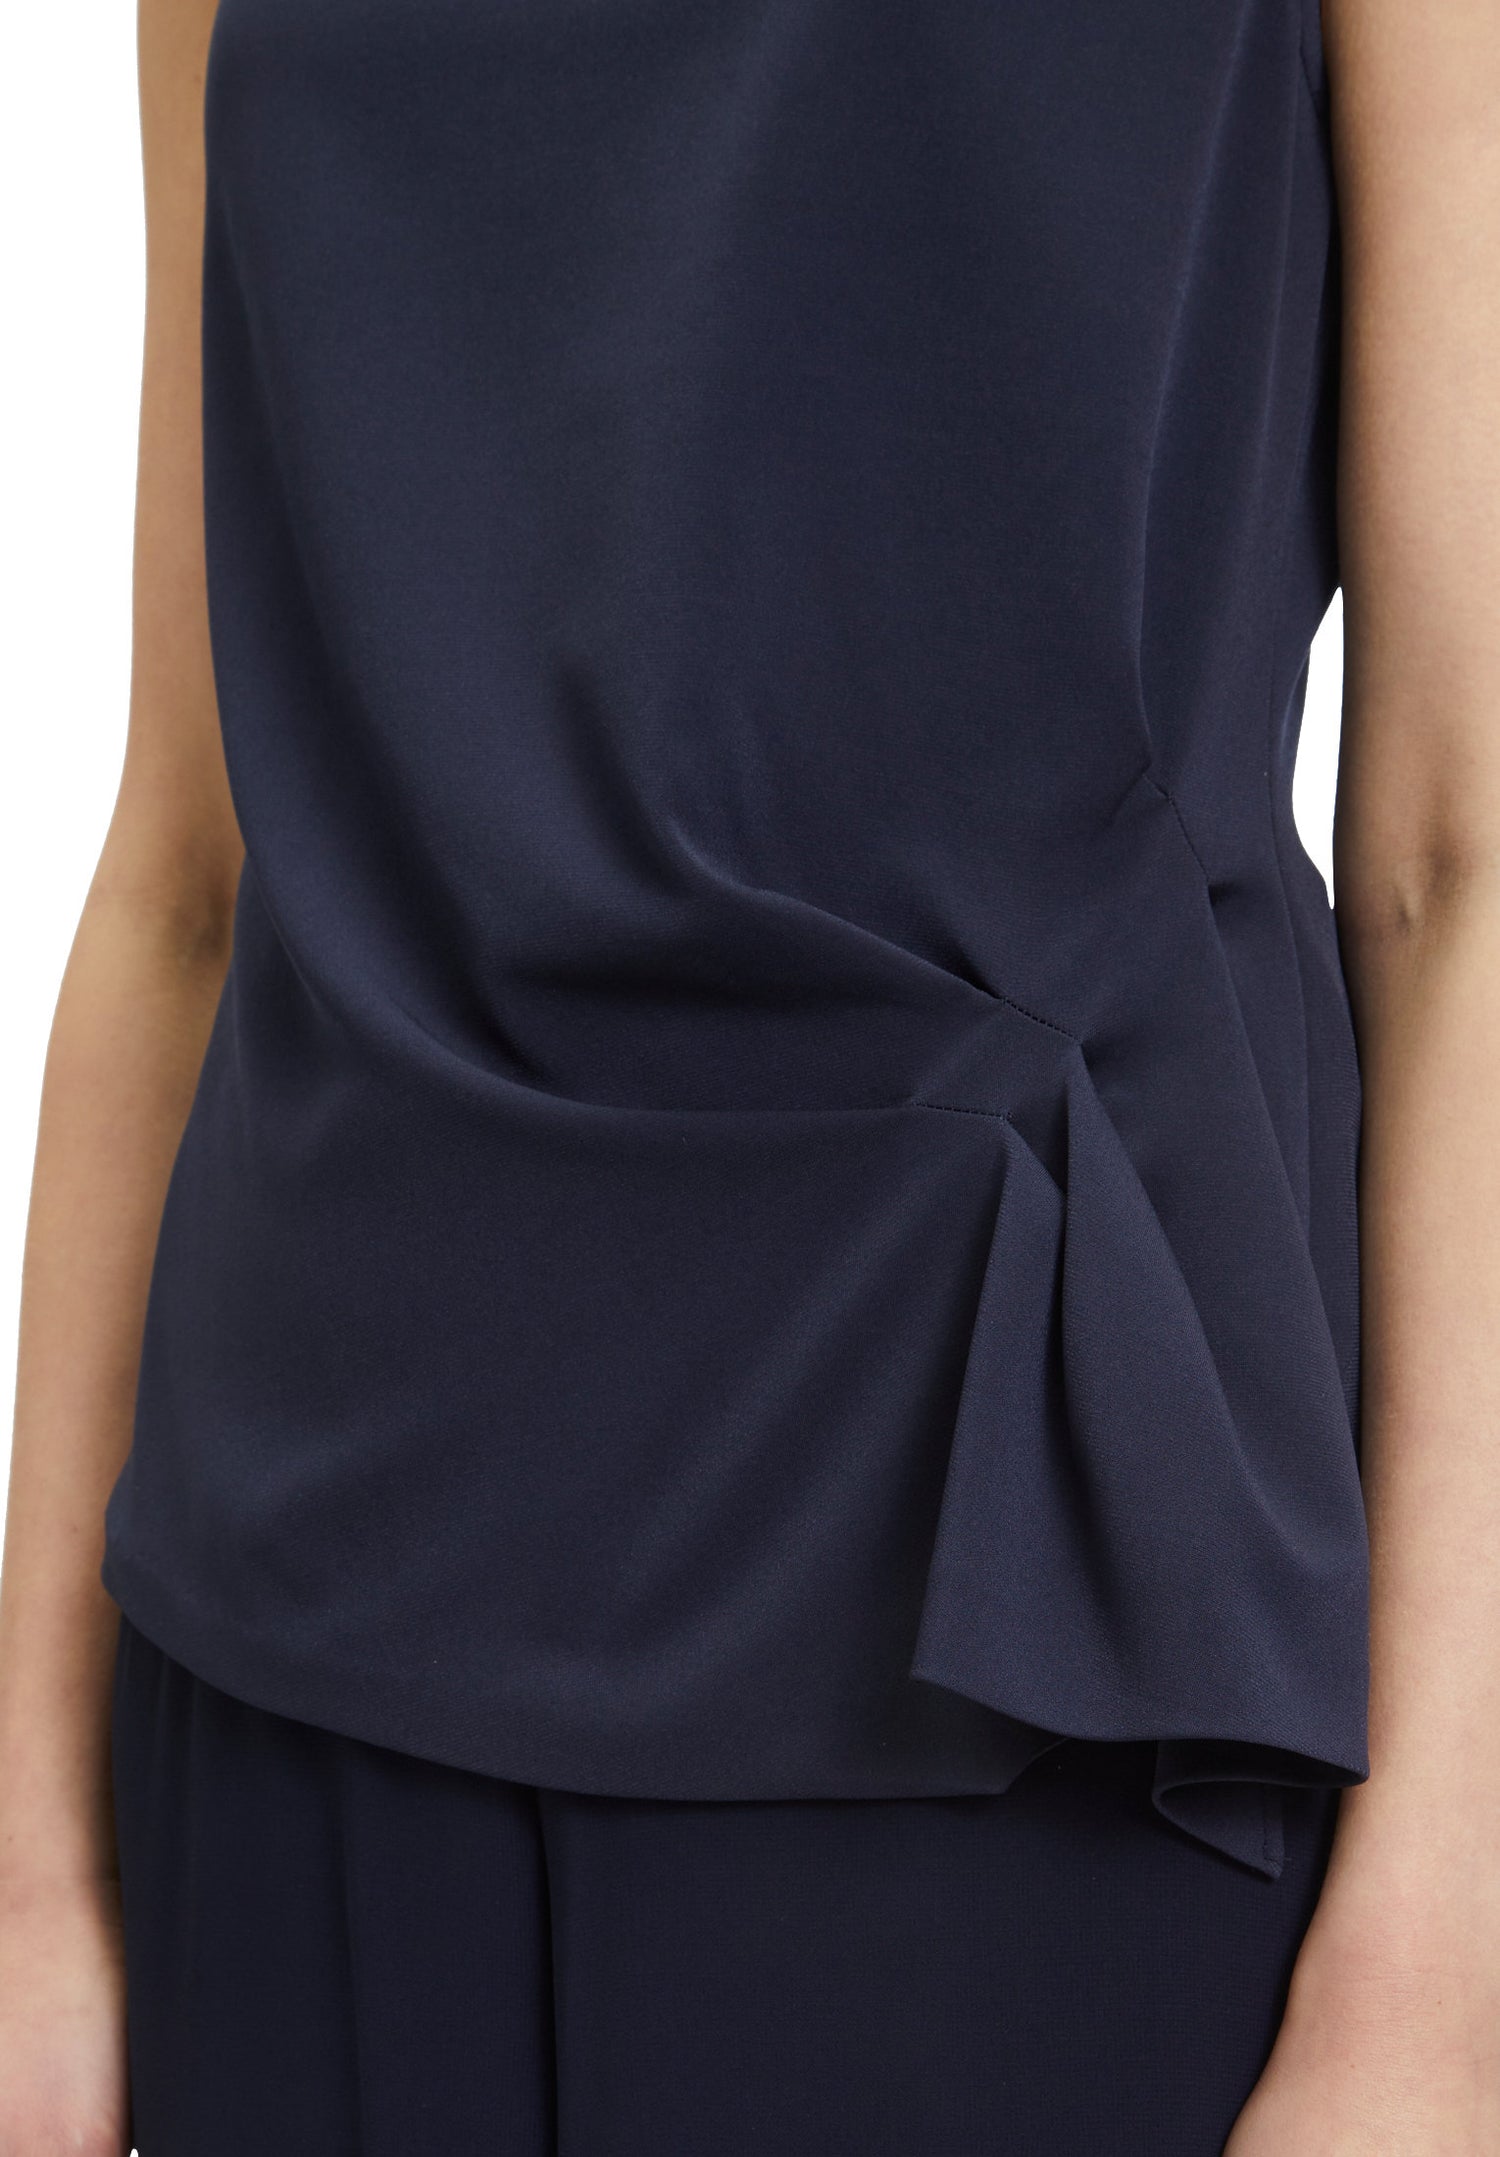 Sleeveless Top With Side Knot_4878 4589_8541_07